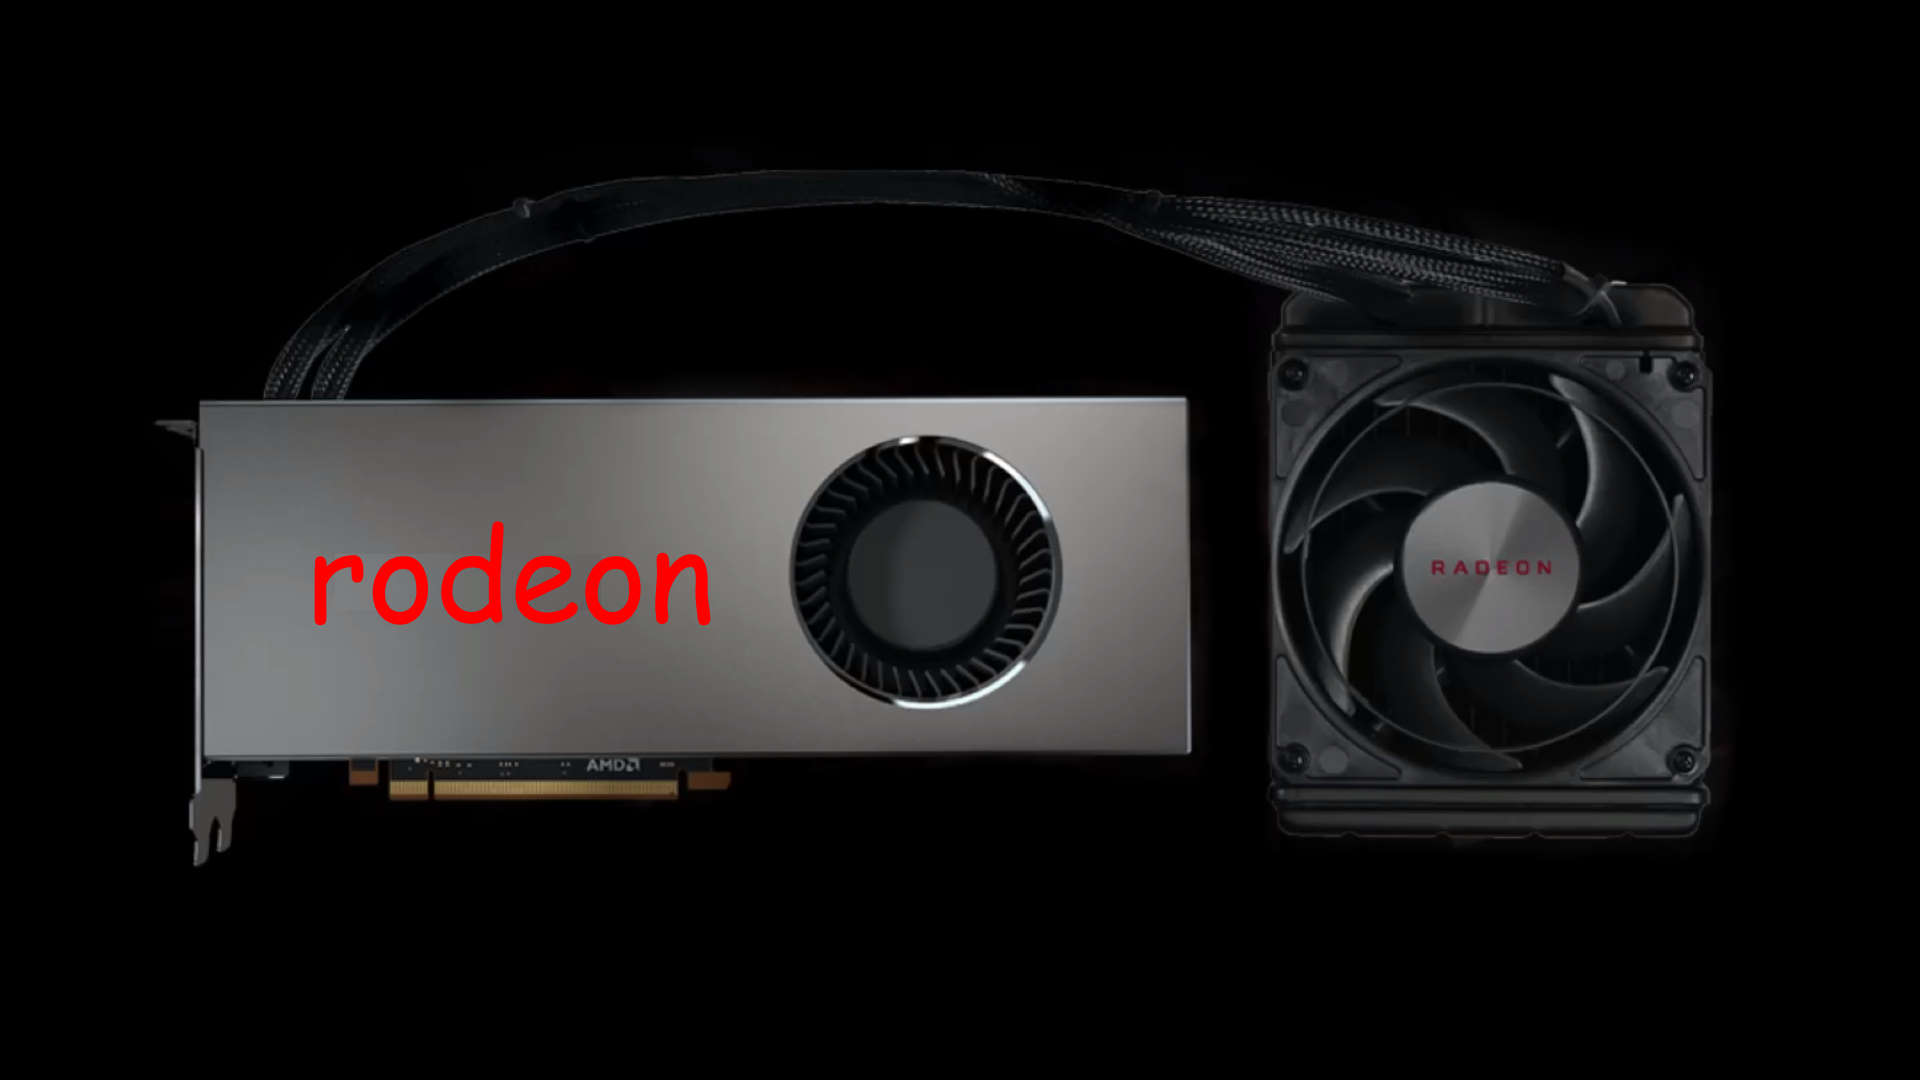 AMD Radeon RX 6900 XT: Big Navi costs $999 in these leaked slides